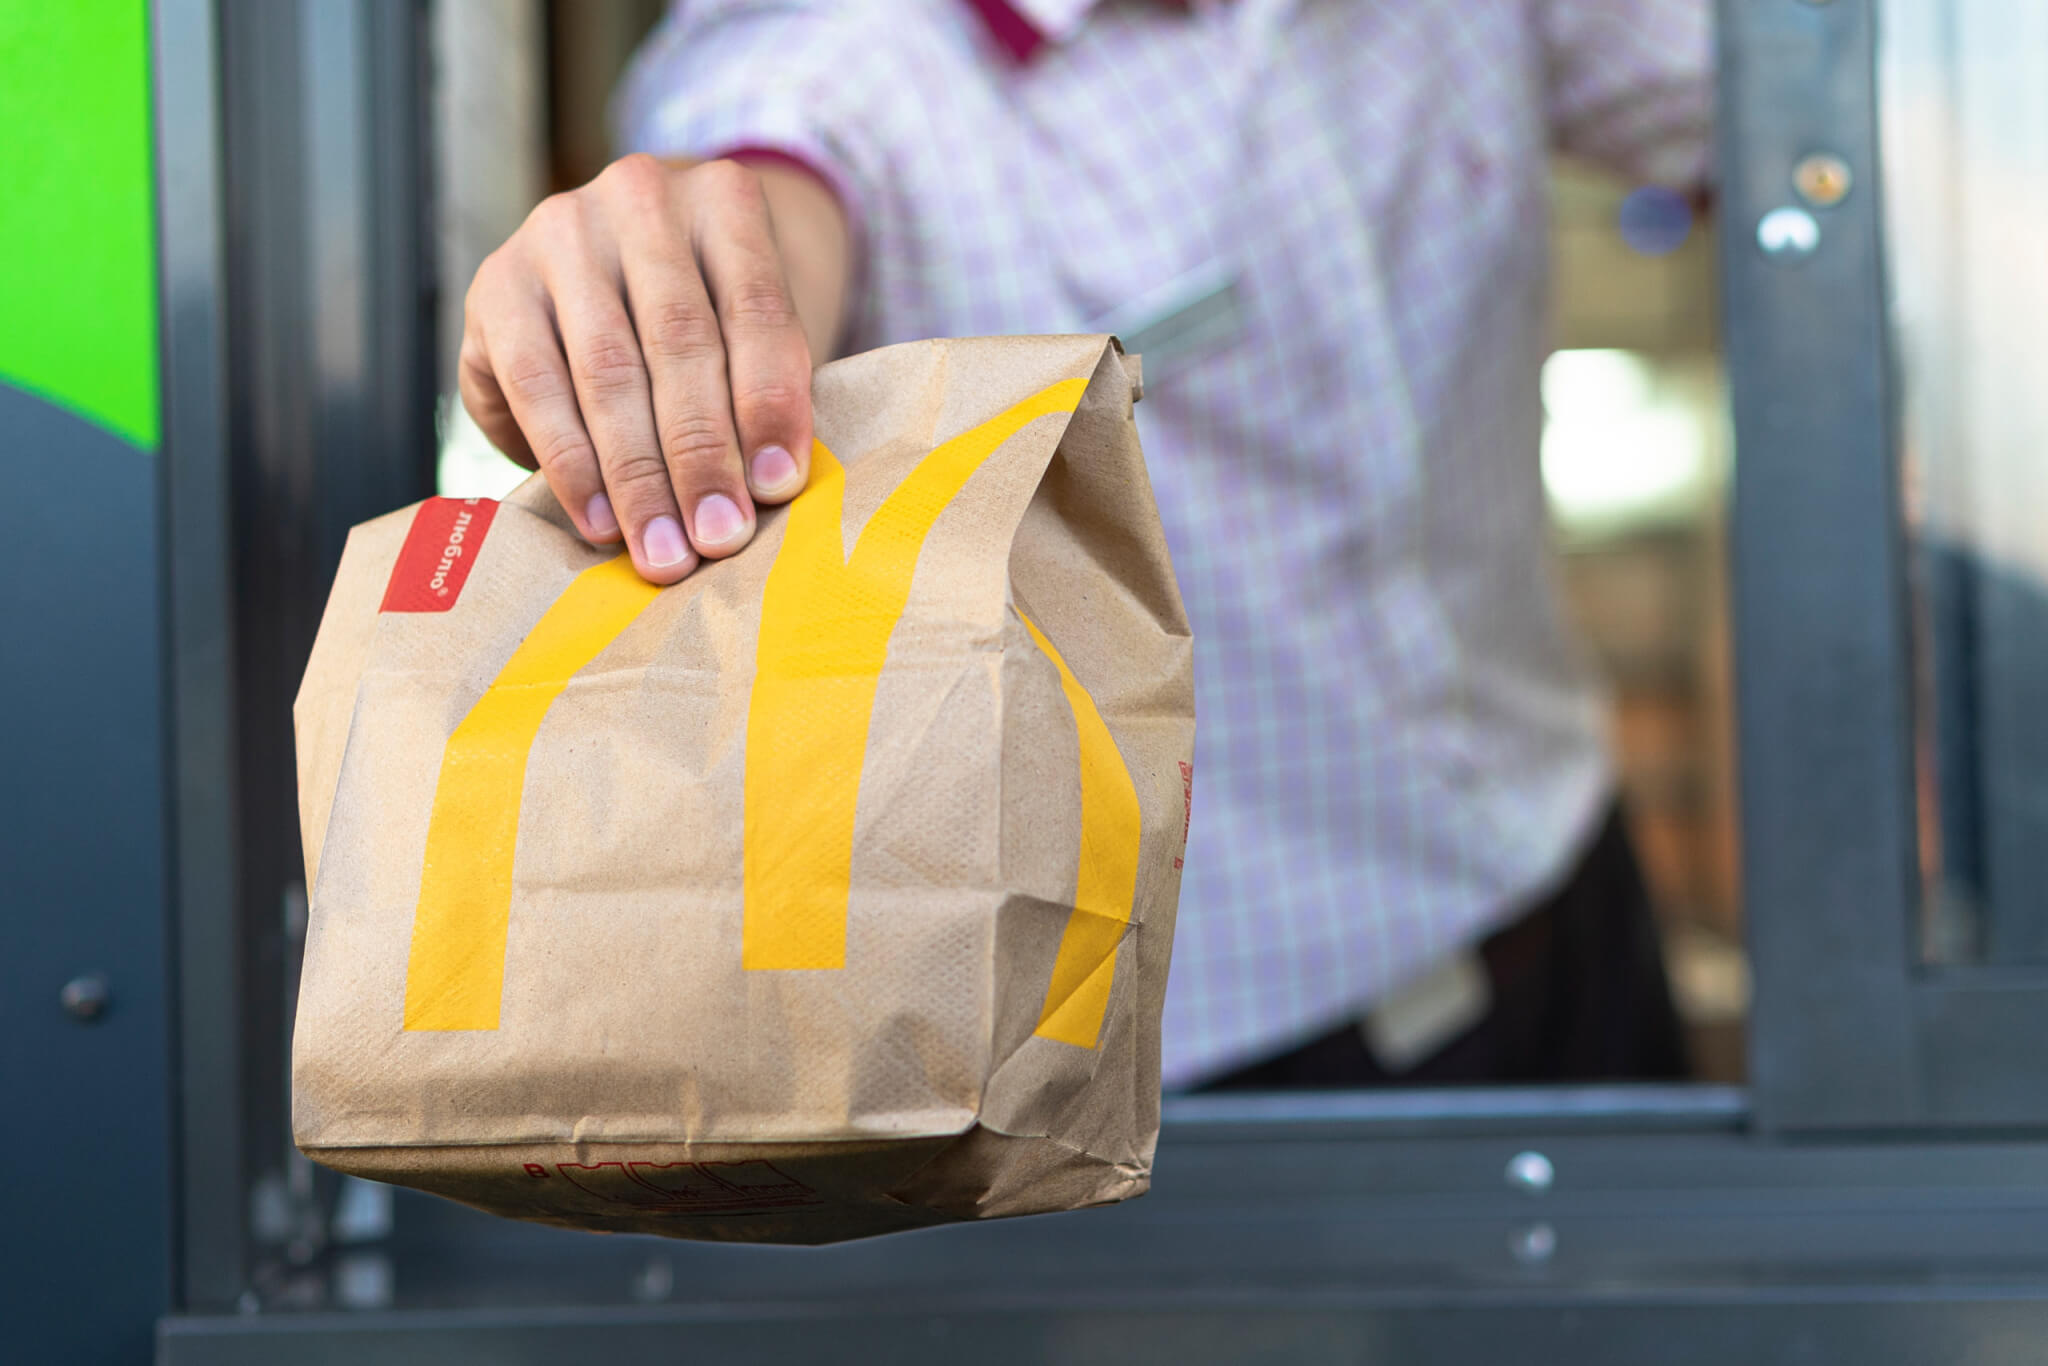 Healthiest Fast Food Options: Top 5 ‘Not So Bad For You’ Menu Items Recommended By Experts